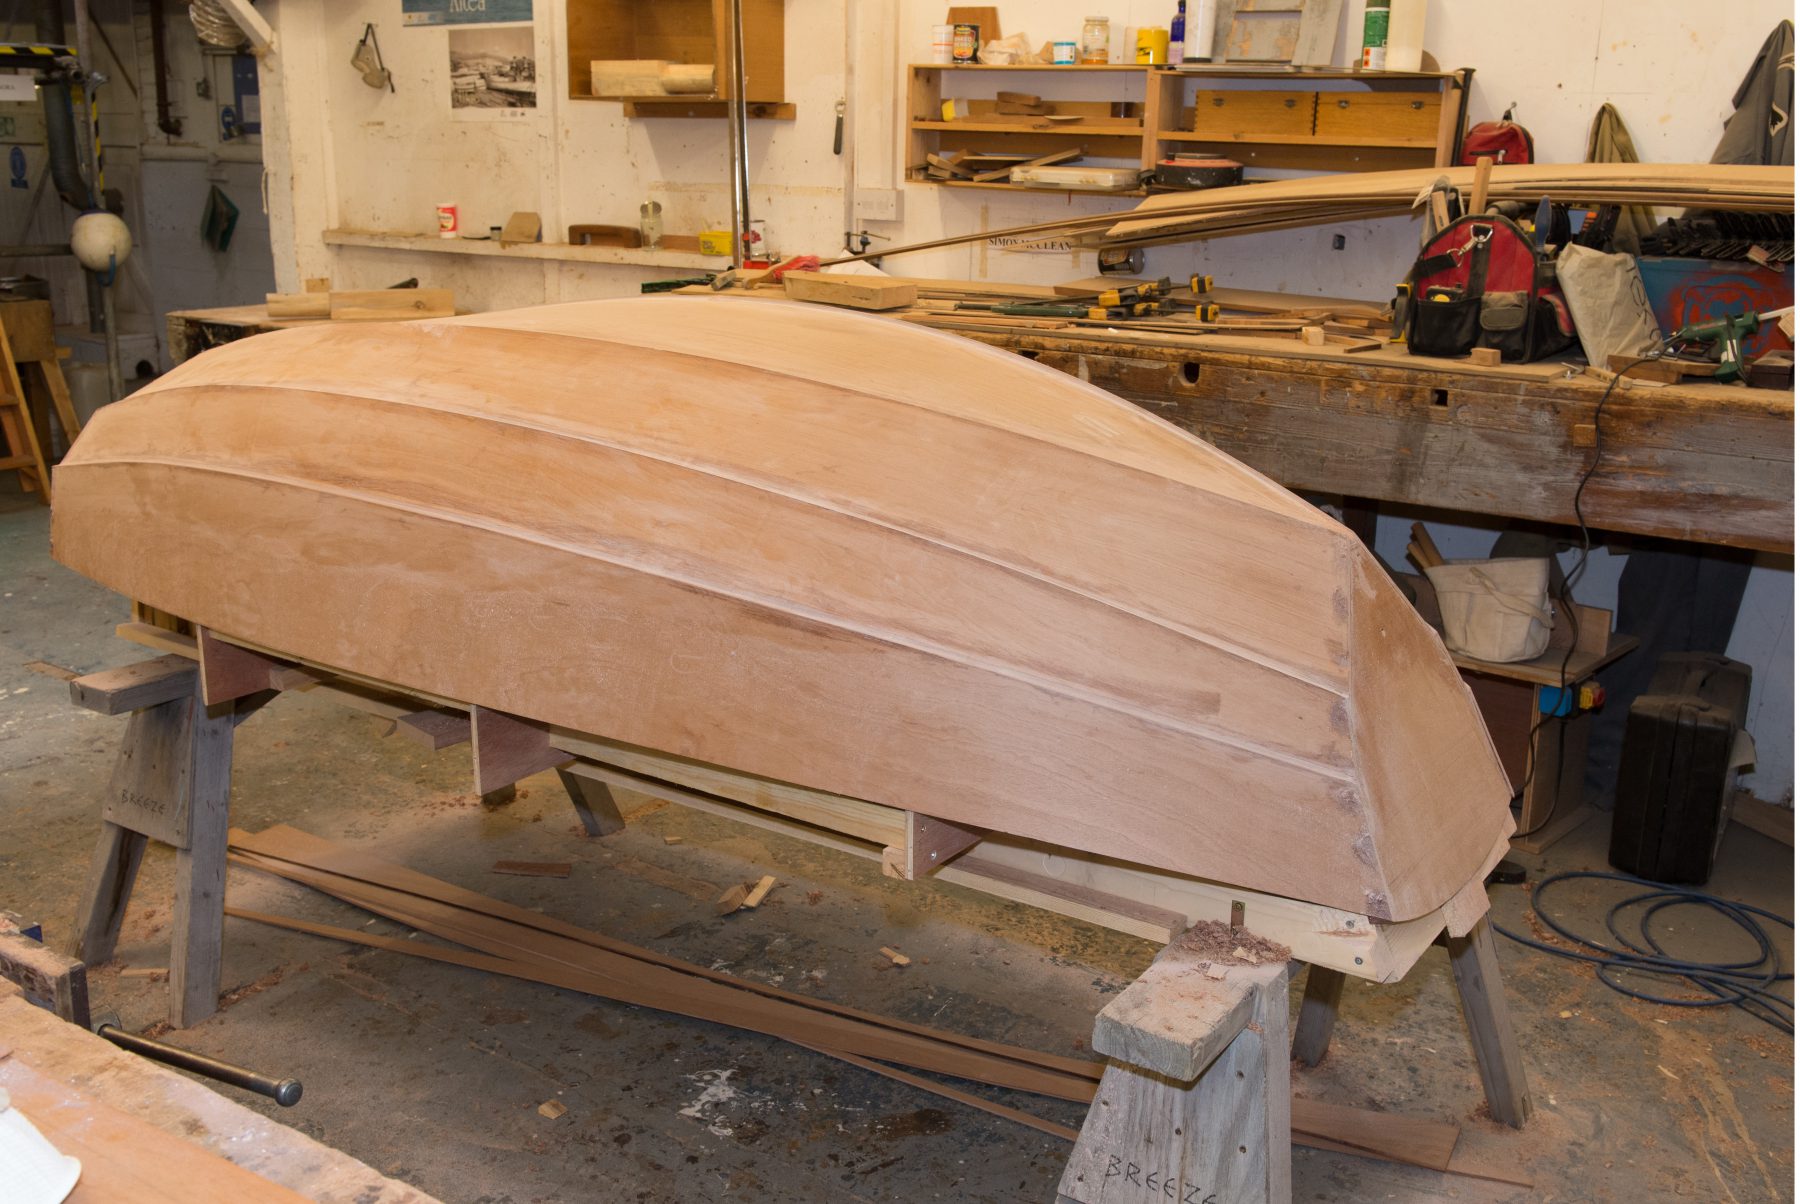 Constructing a watertight pram dinghy with the help of epoxy